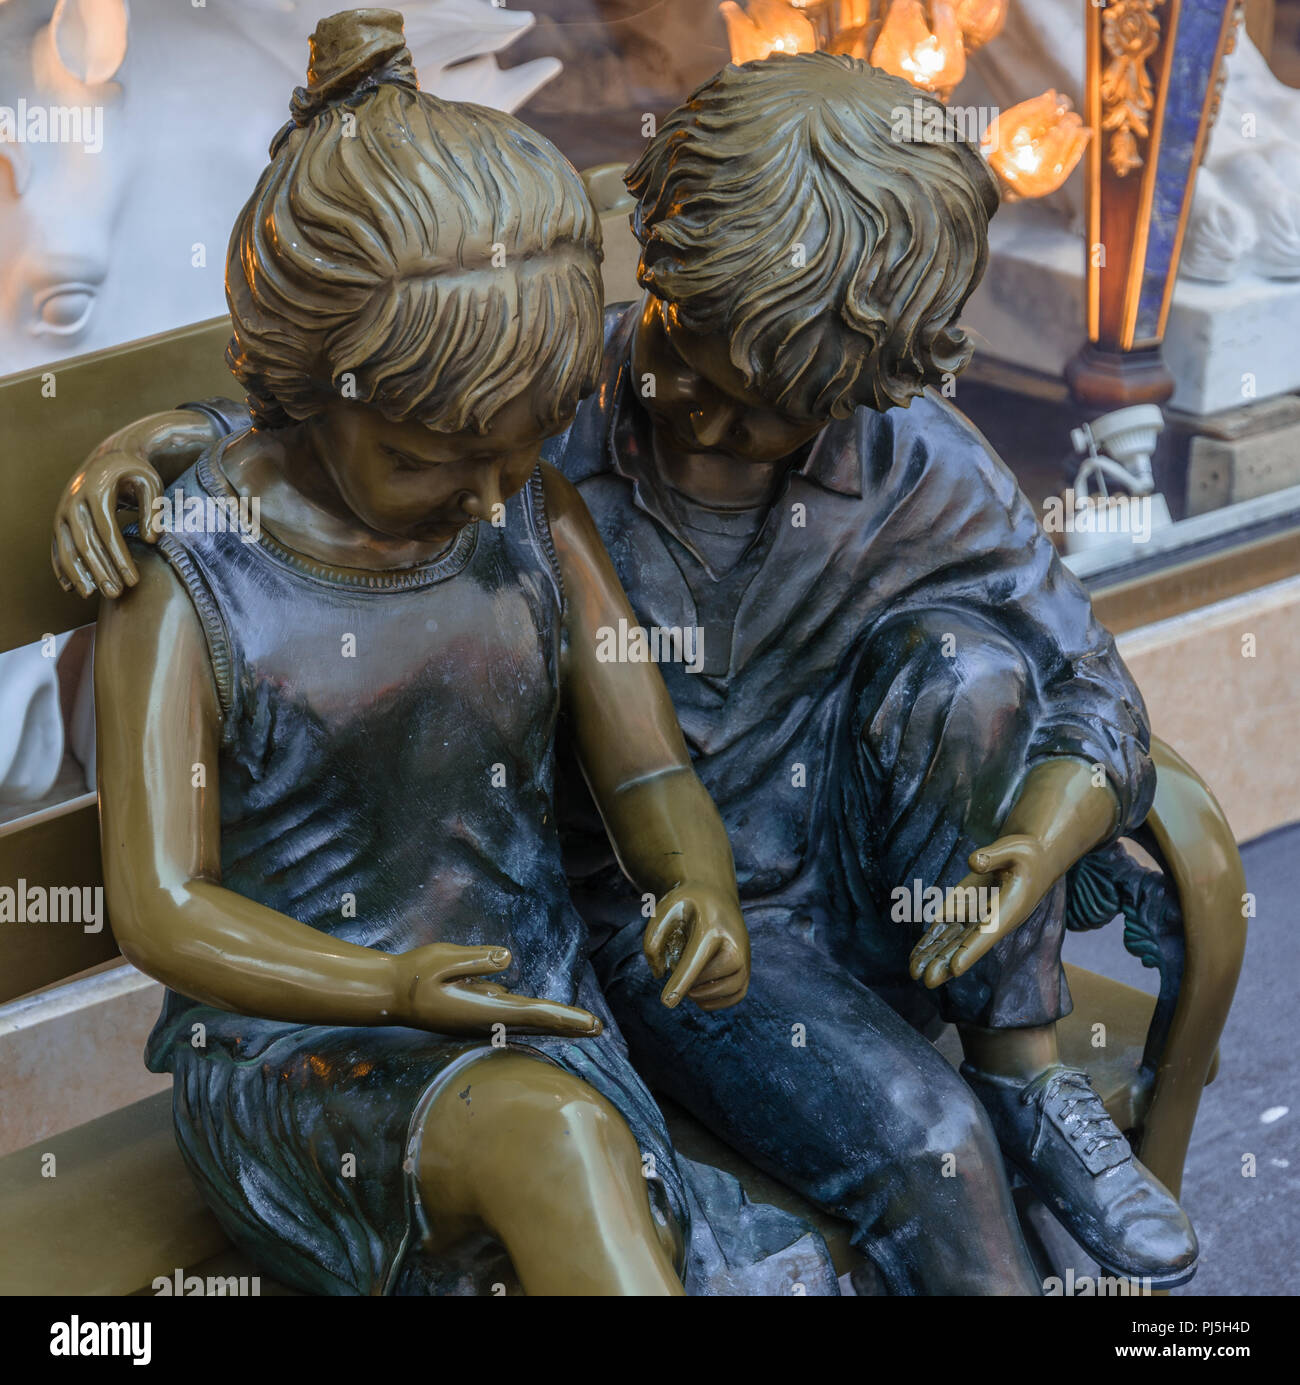 Bronze Sculpture Of Two Children Sitting On A Bench Taken In Chinatown San Francisco Stock Photo